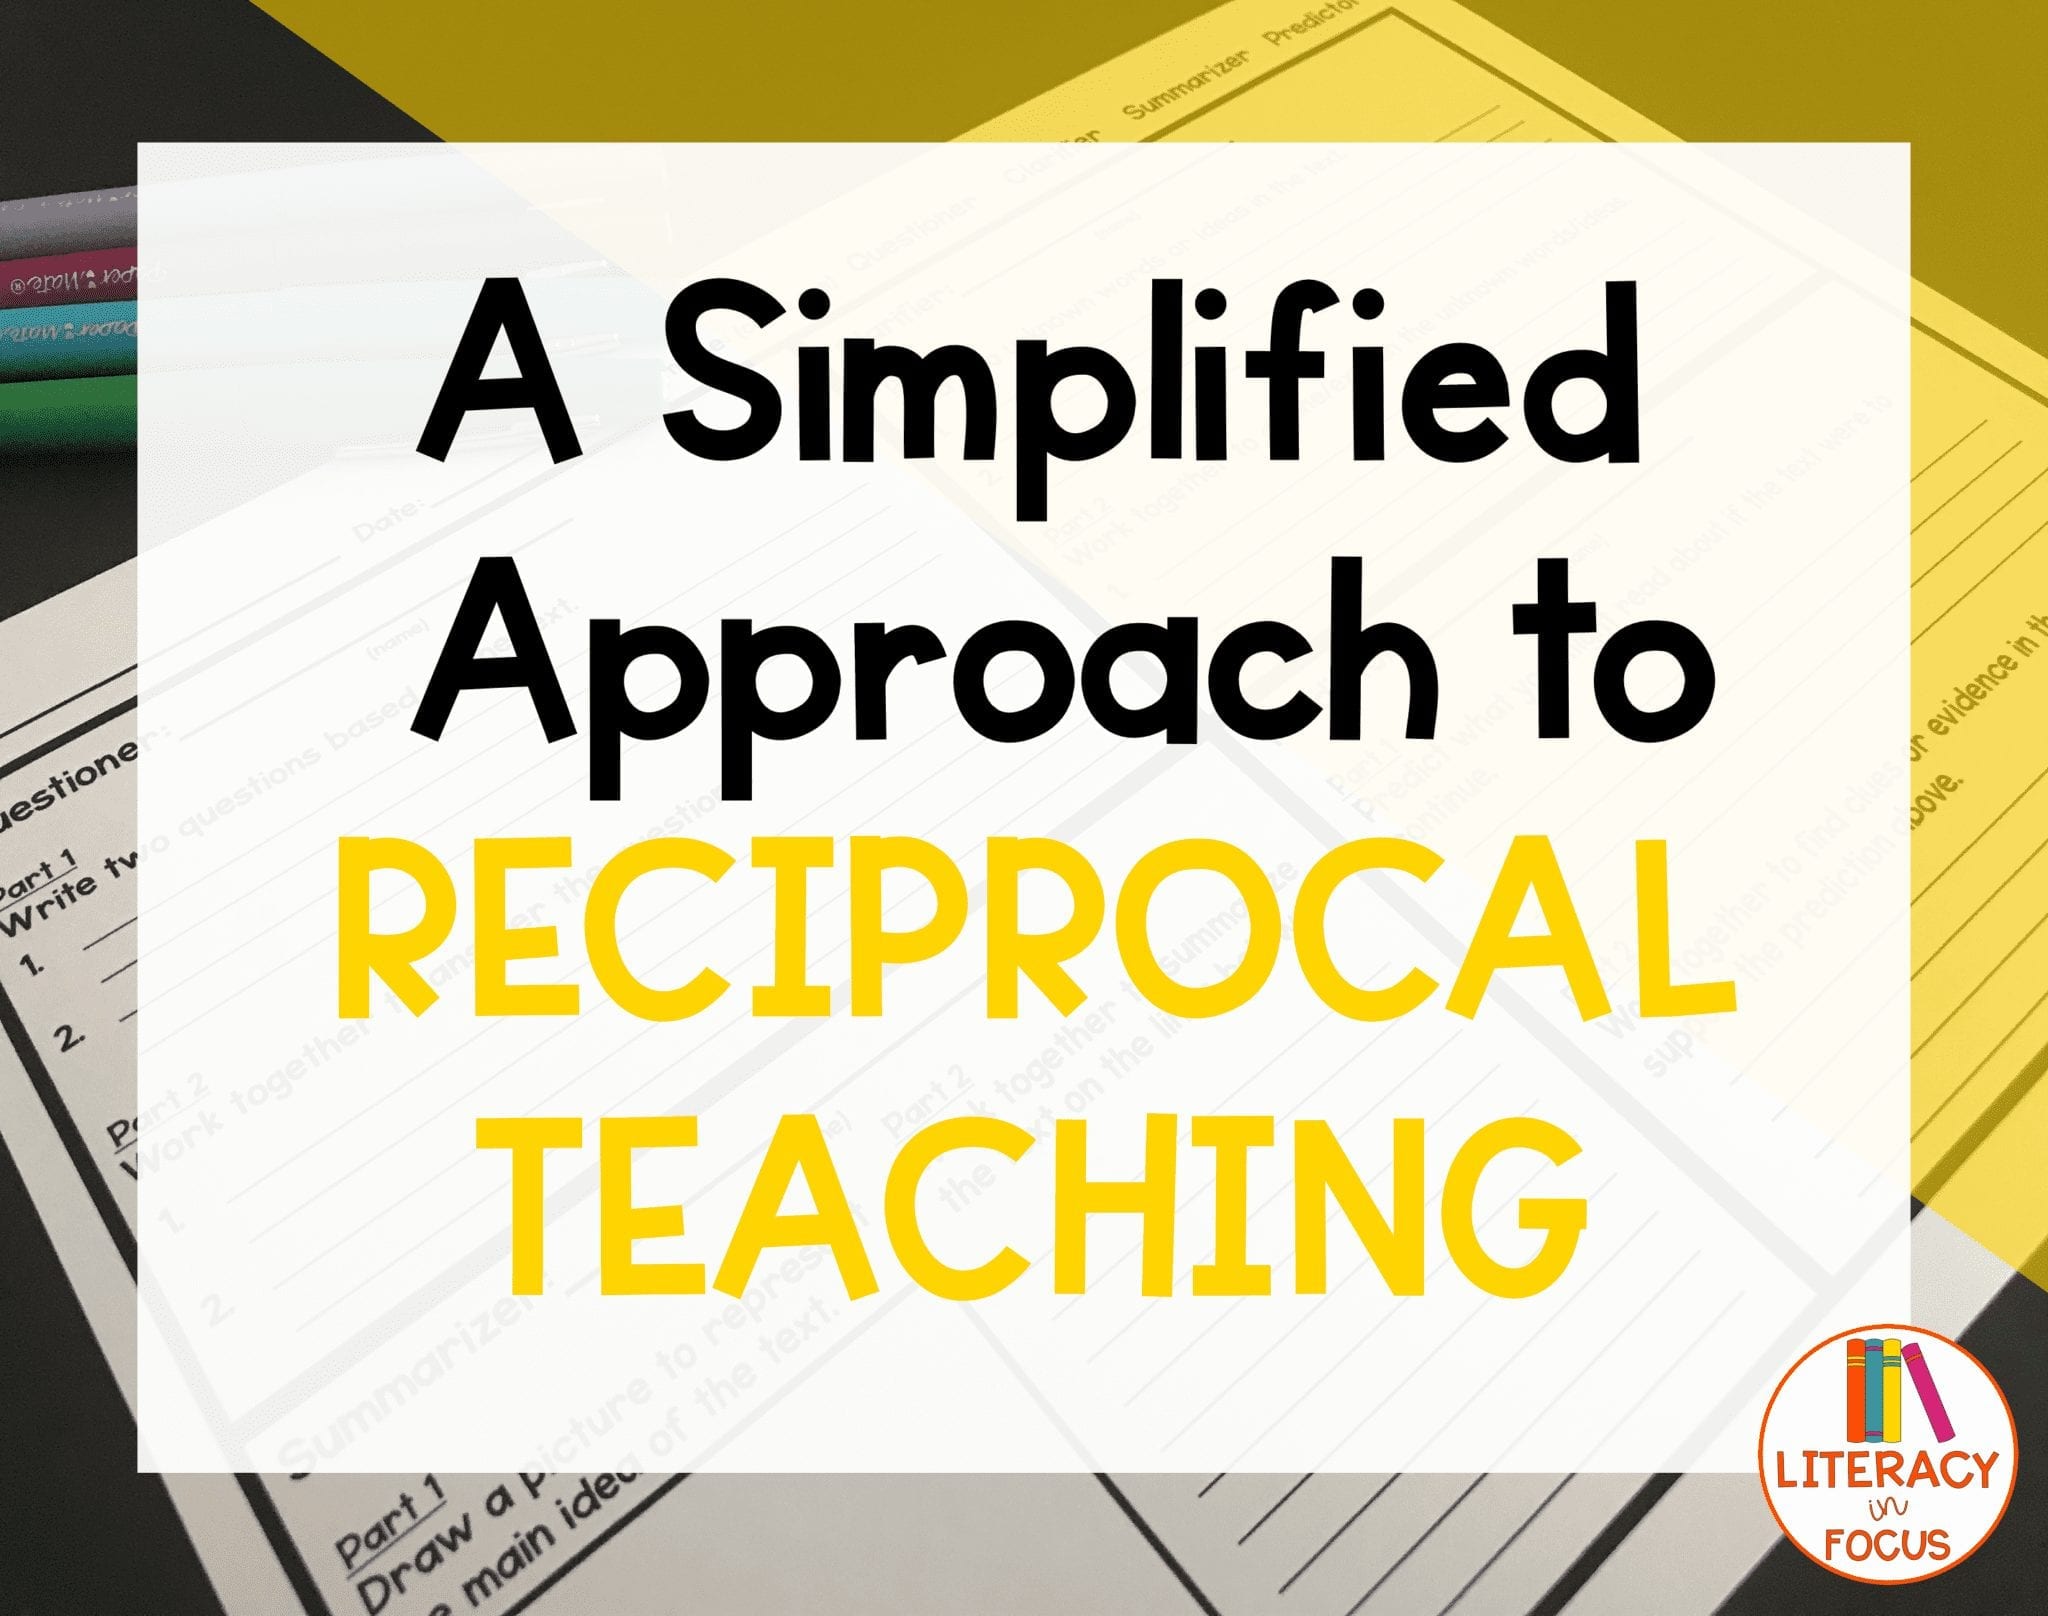 A Simplified Approach To Reciprocal Teaching Literacy In Focus